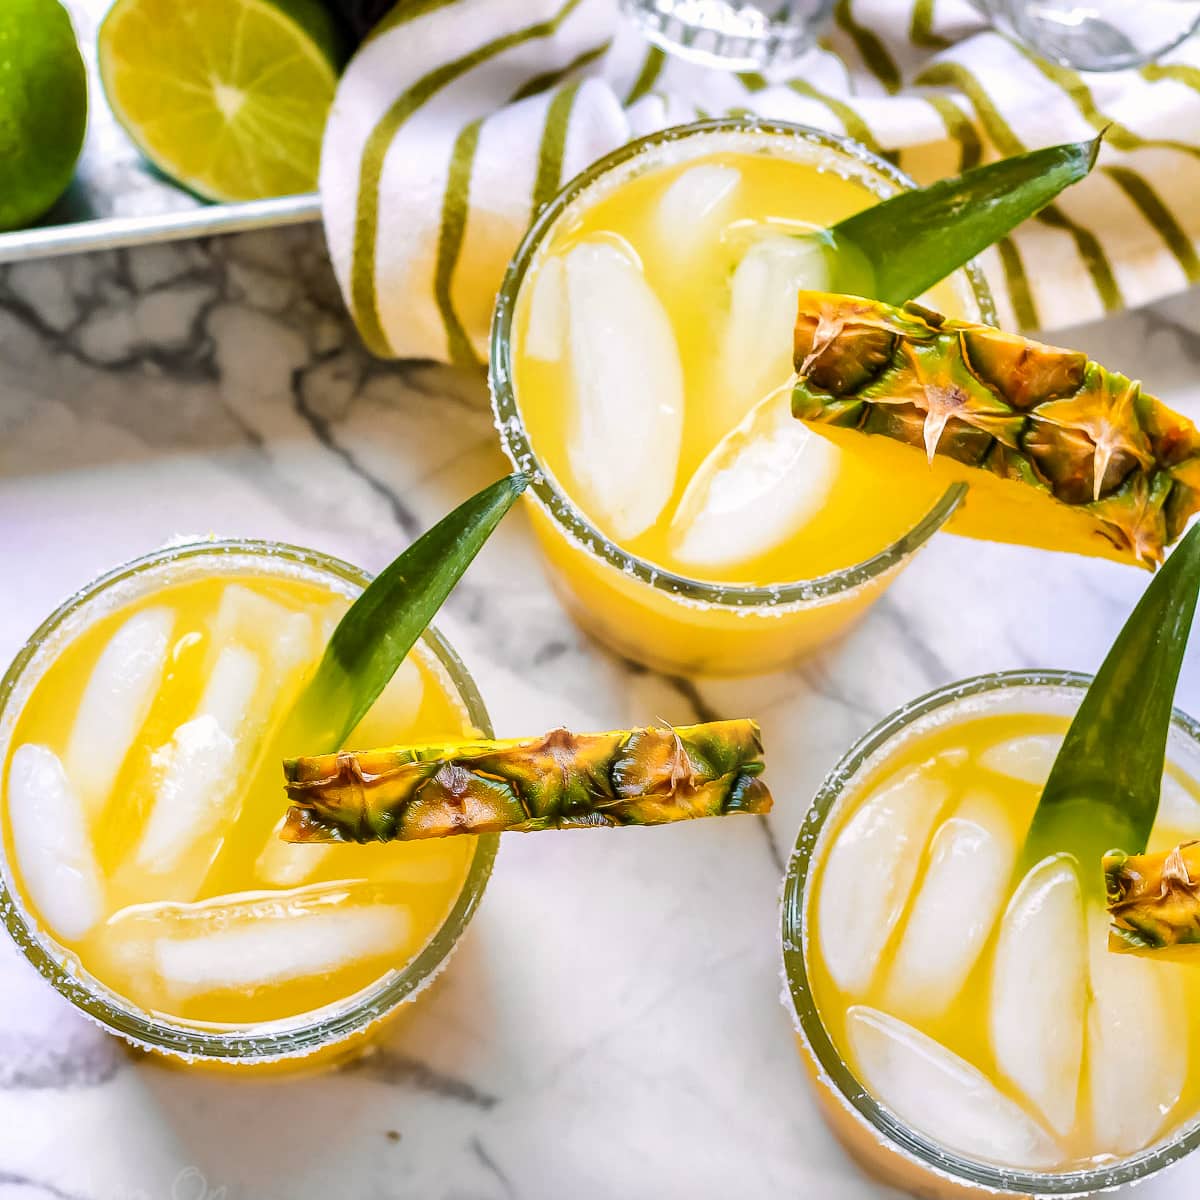 https://www.momontimeout.com/wp-content/uploads/2020/06/pineapple-margaritas-on-marble-cutting-board-with-pineapple-in-the-background-square.jpg